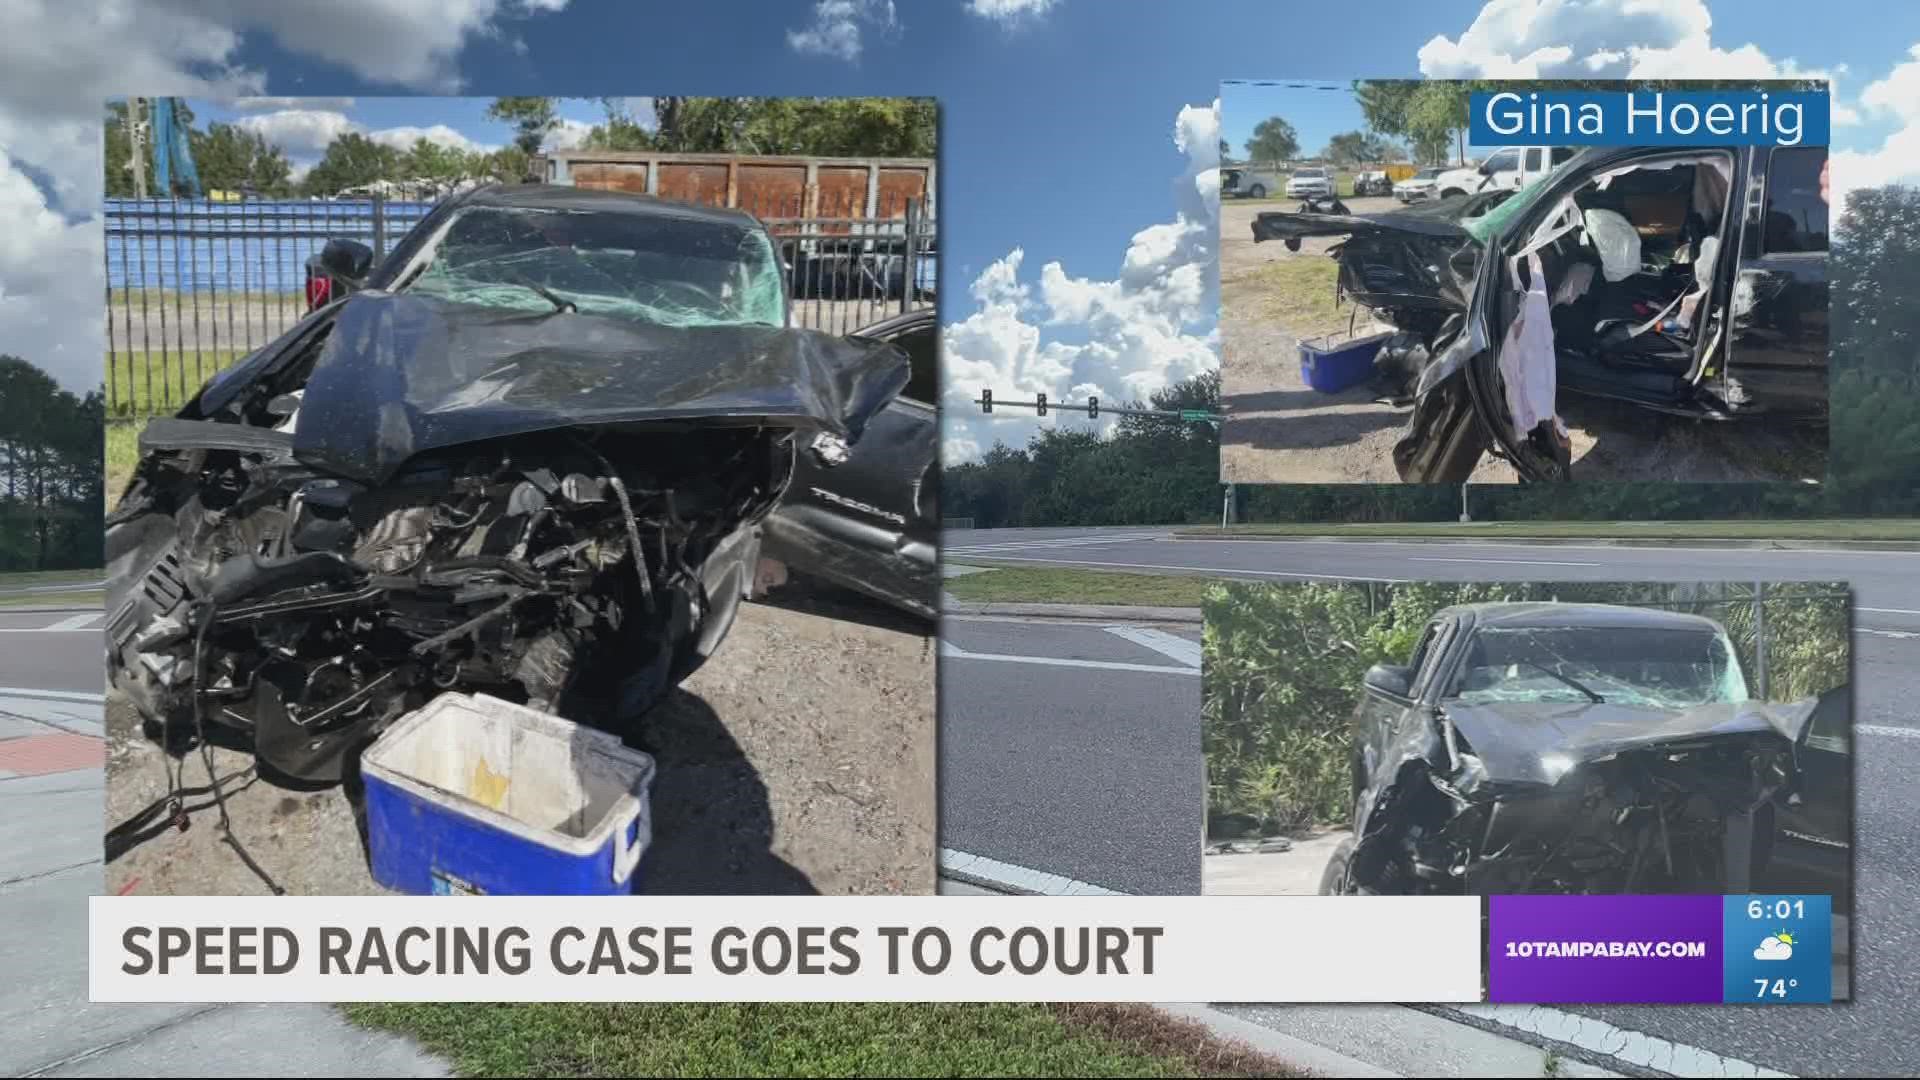 Charles Meininger is facing vehicular homicide and illegal street racing charges.